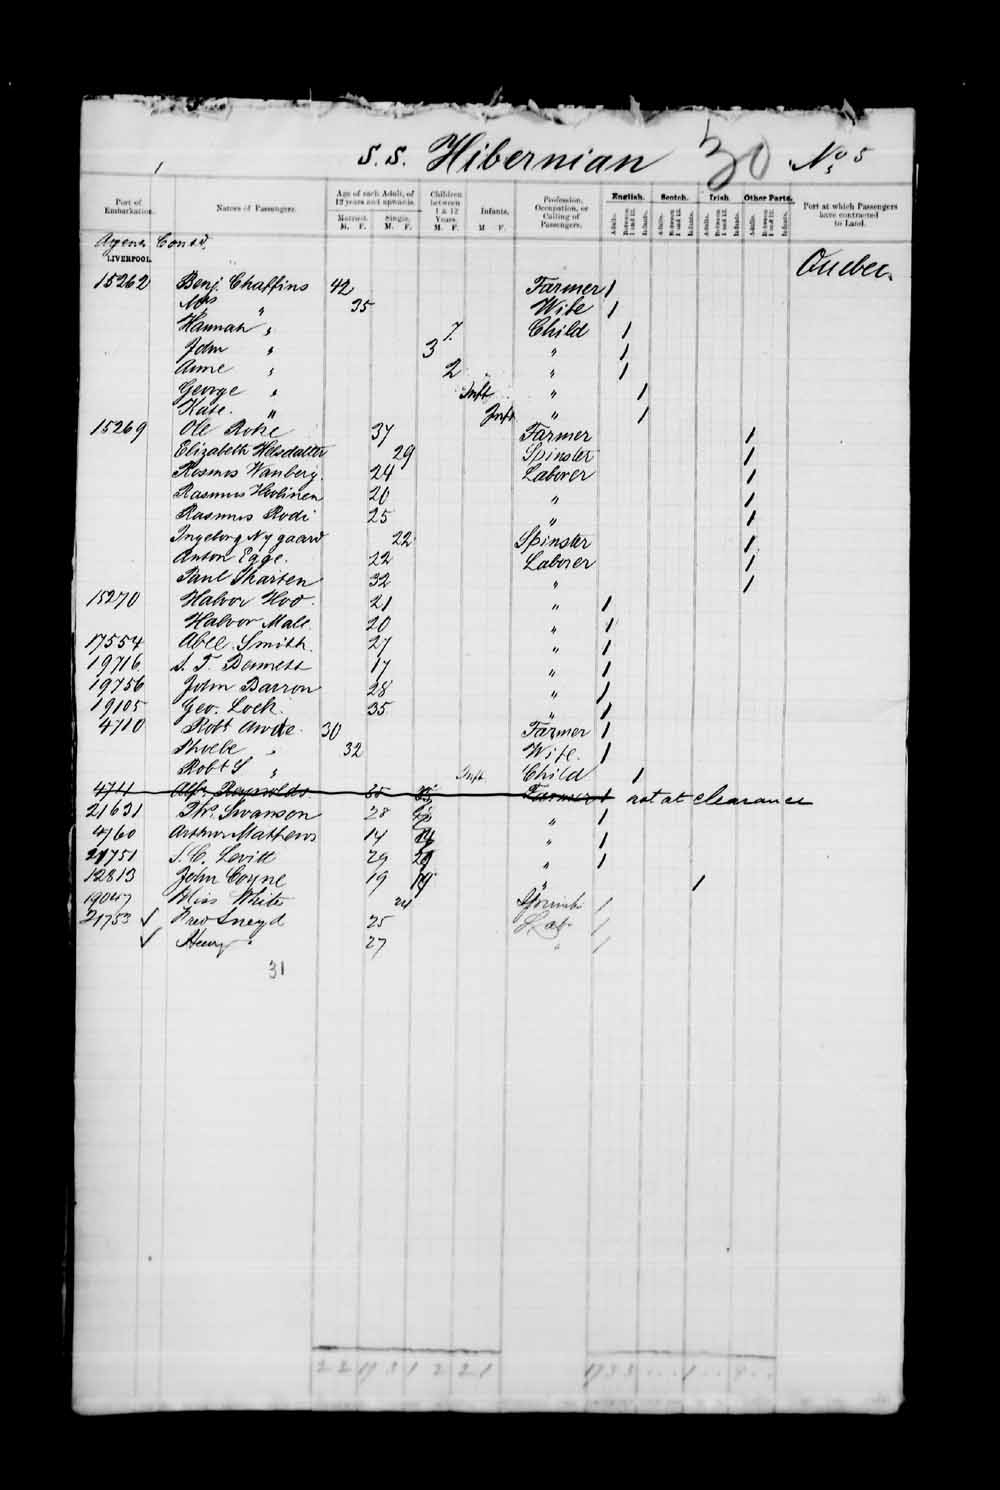 Digitized page of Passenger Lists for Image No.: e003530479